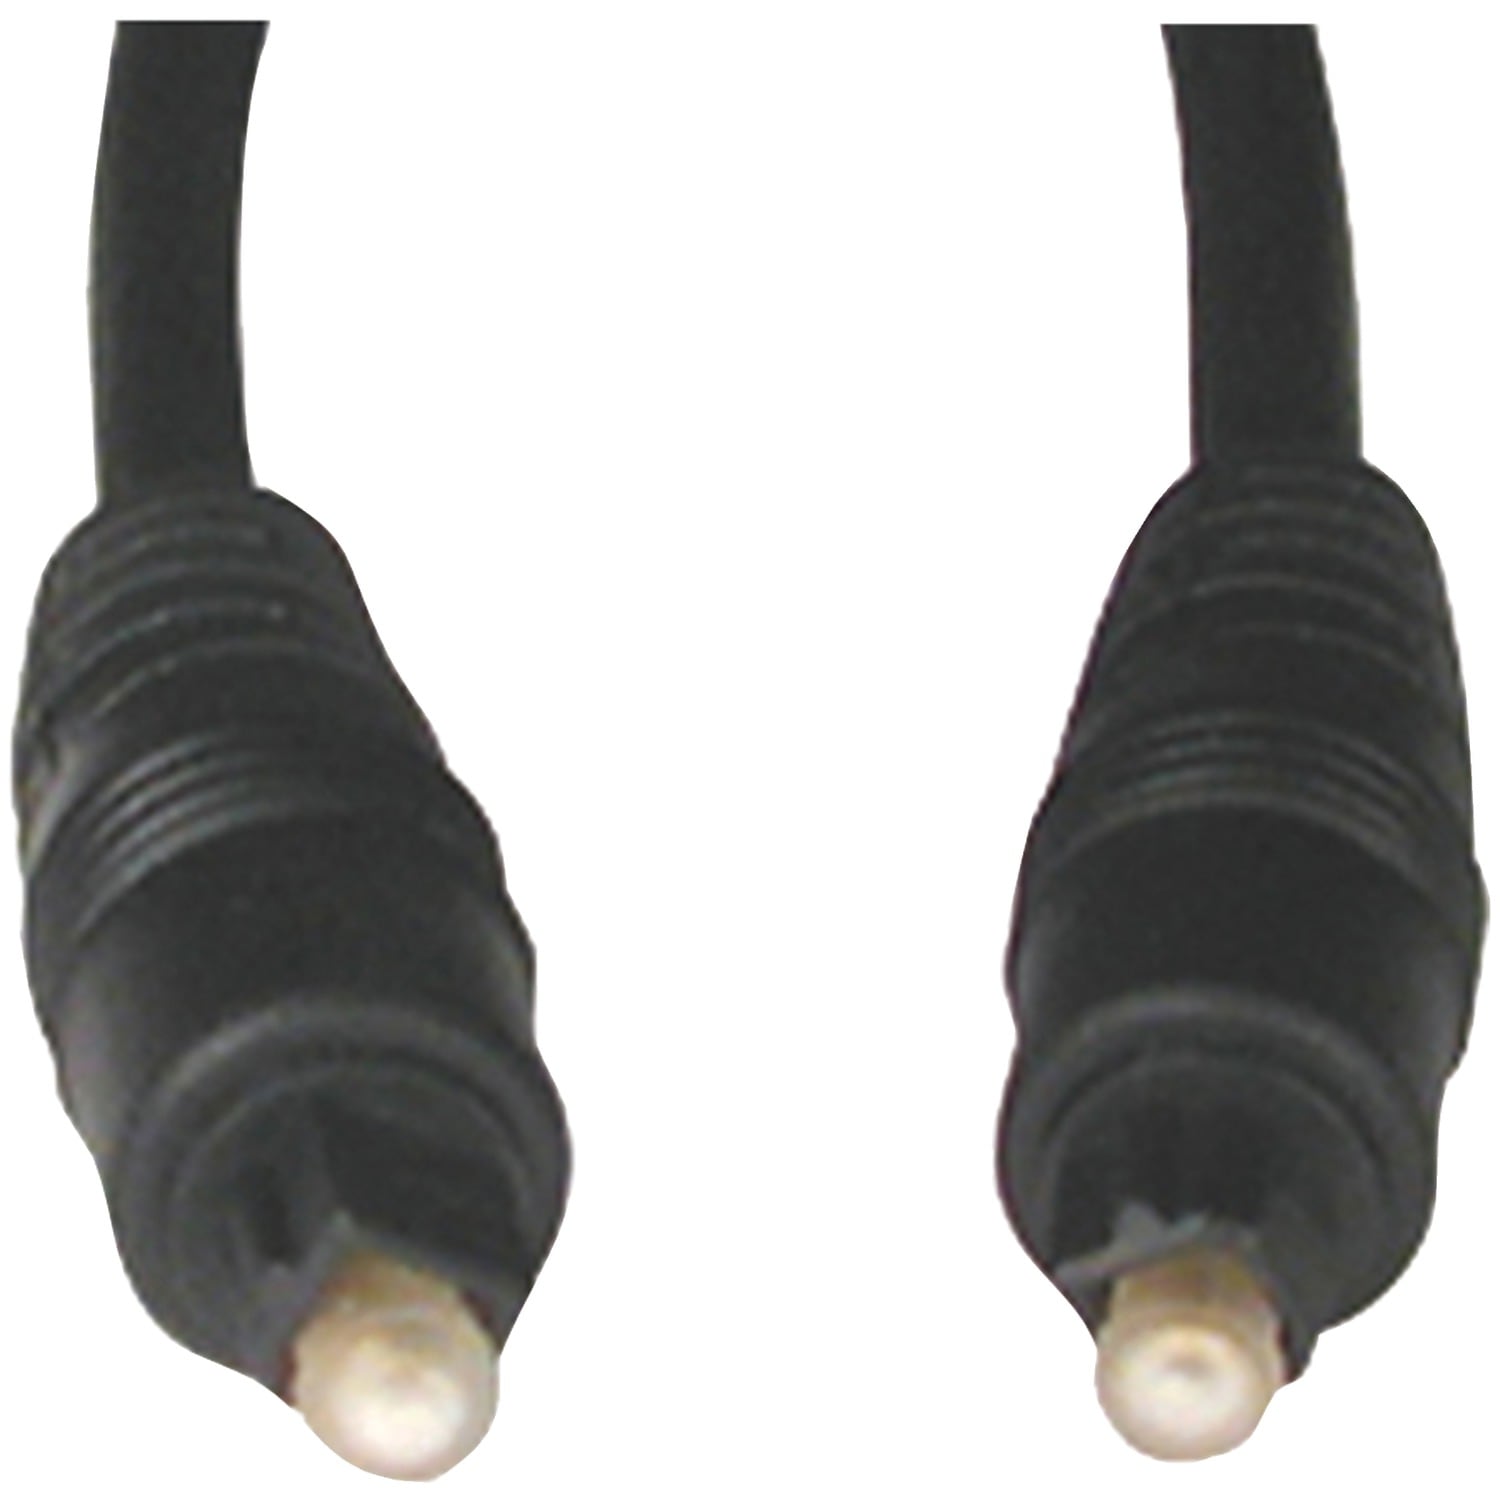 optical audio cable